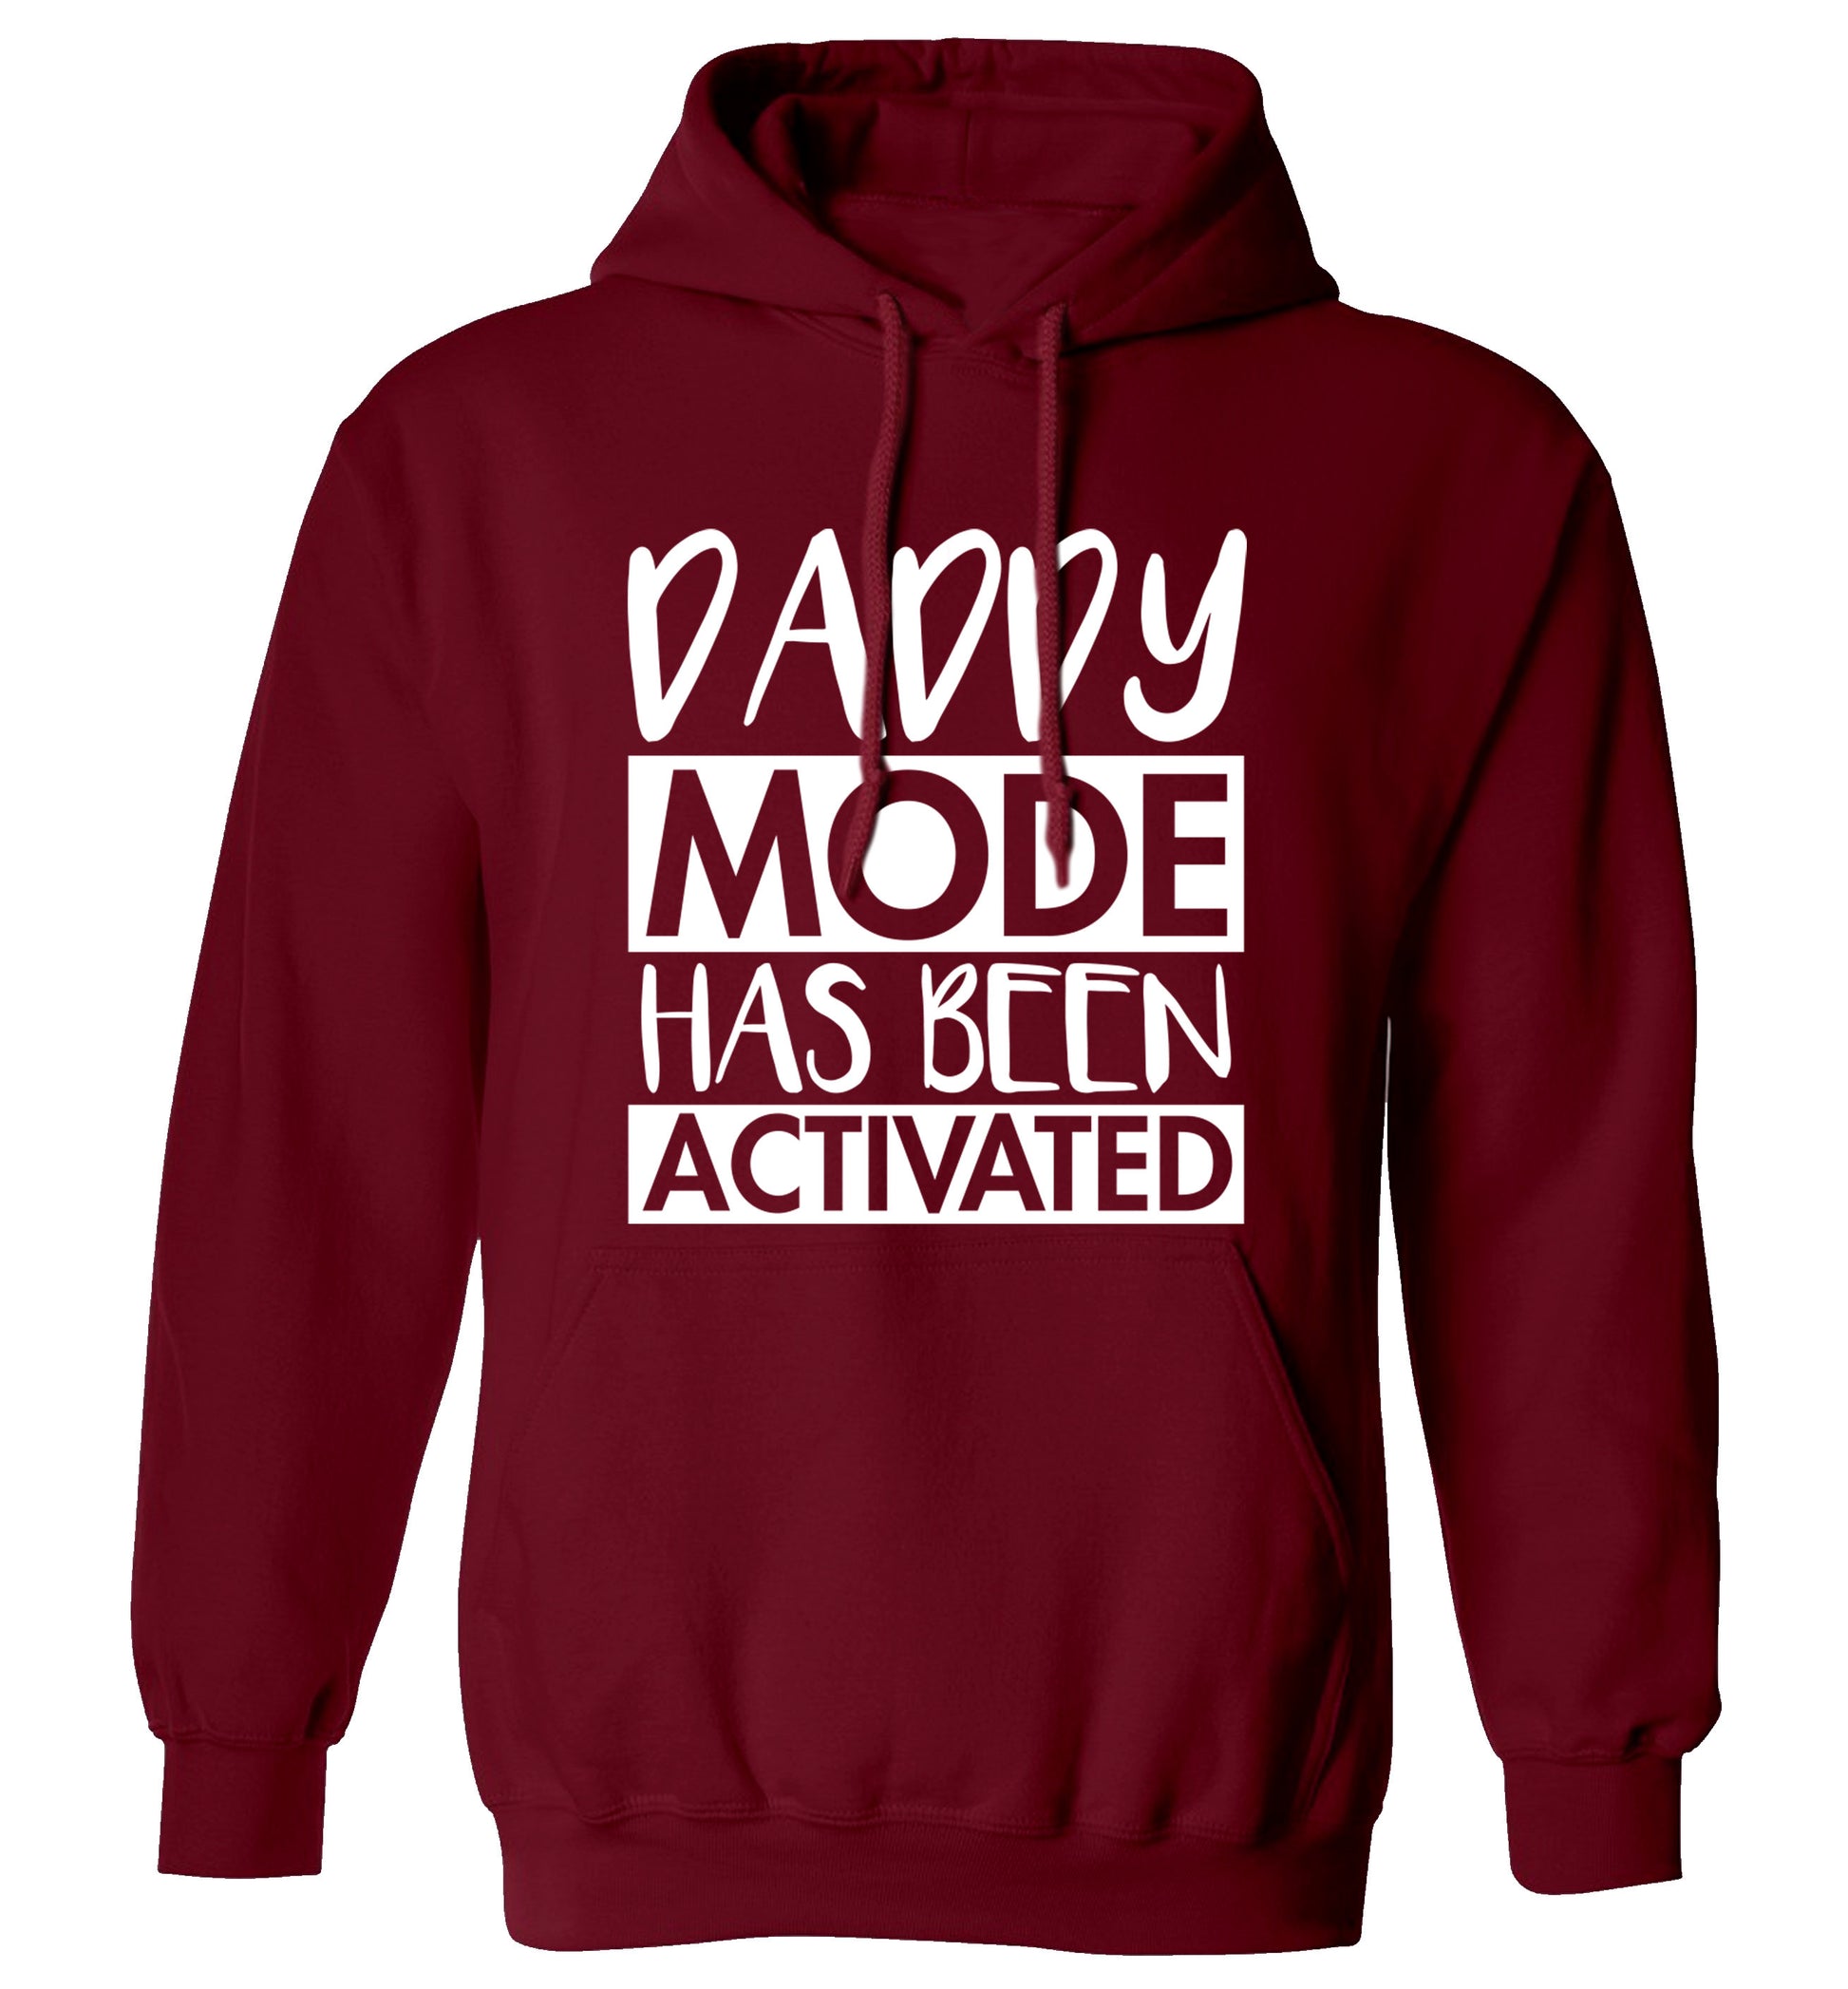 Daddy mode activated adults unisex maroon hoodie 2XL